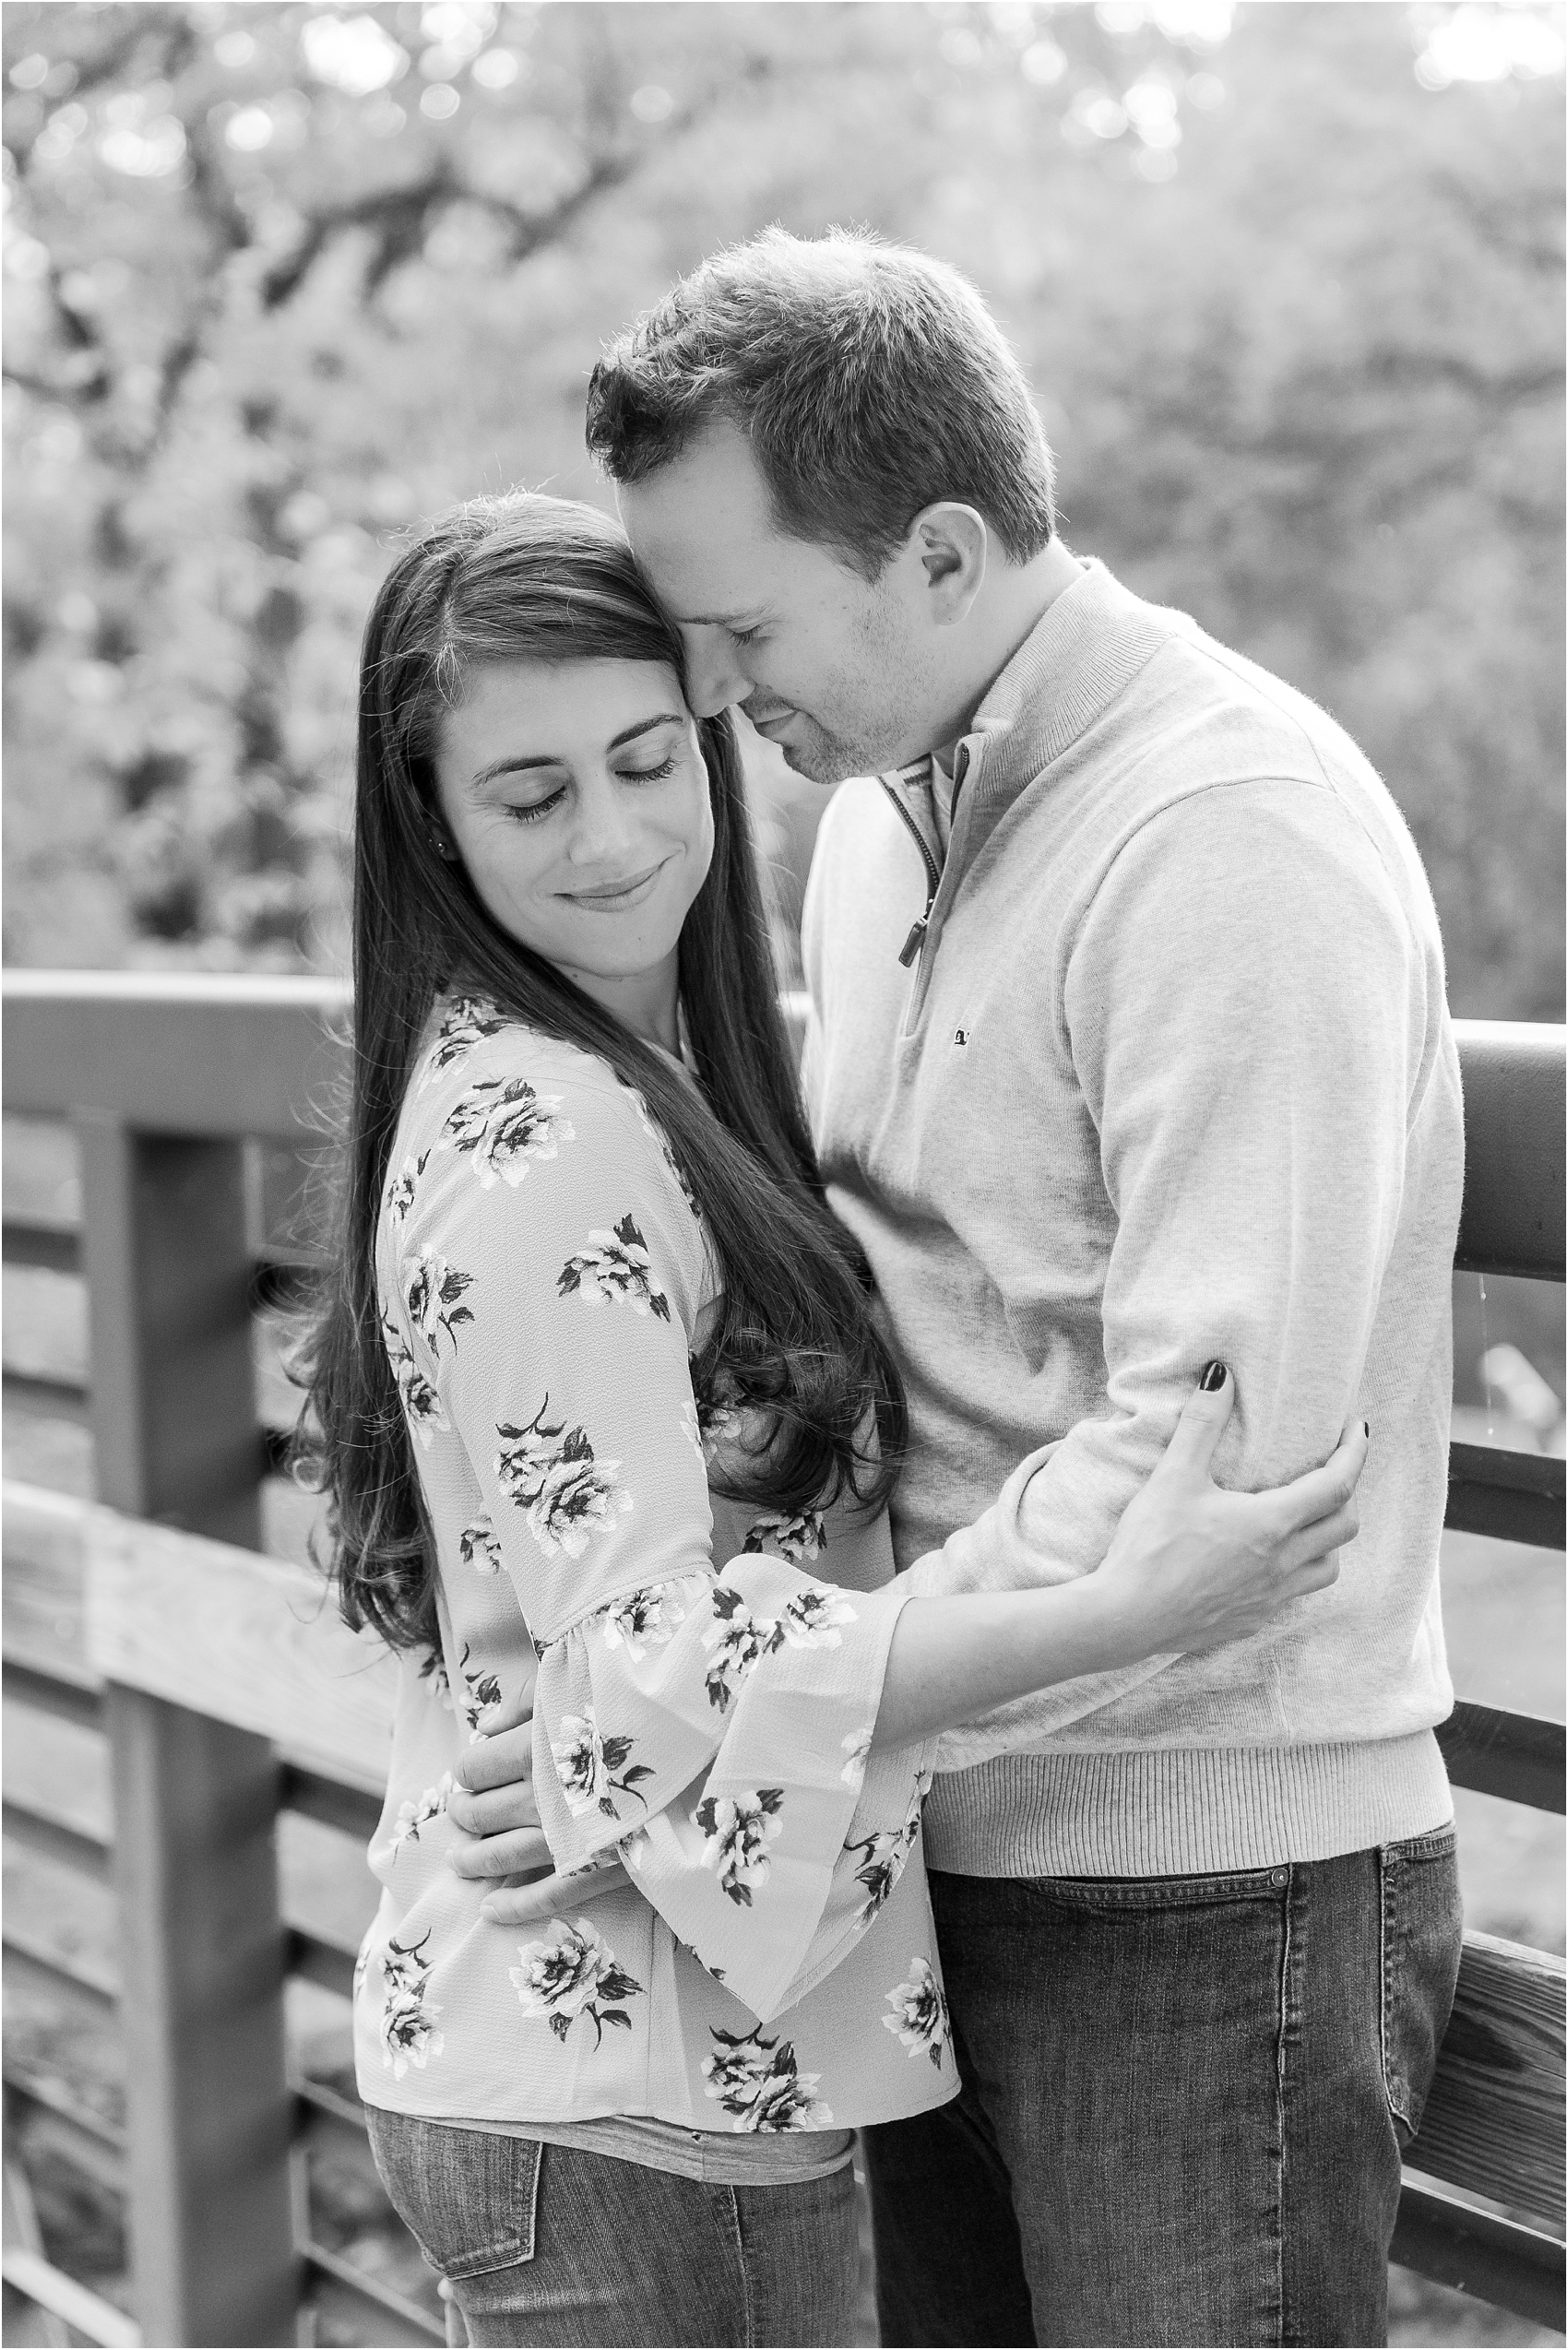 relaxed-autumn-engagement-photos-at-hudson-mills-metropark-in-dexter-mi-by-courtney-carolyn-photography_0036.jpg